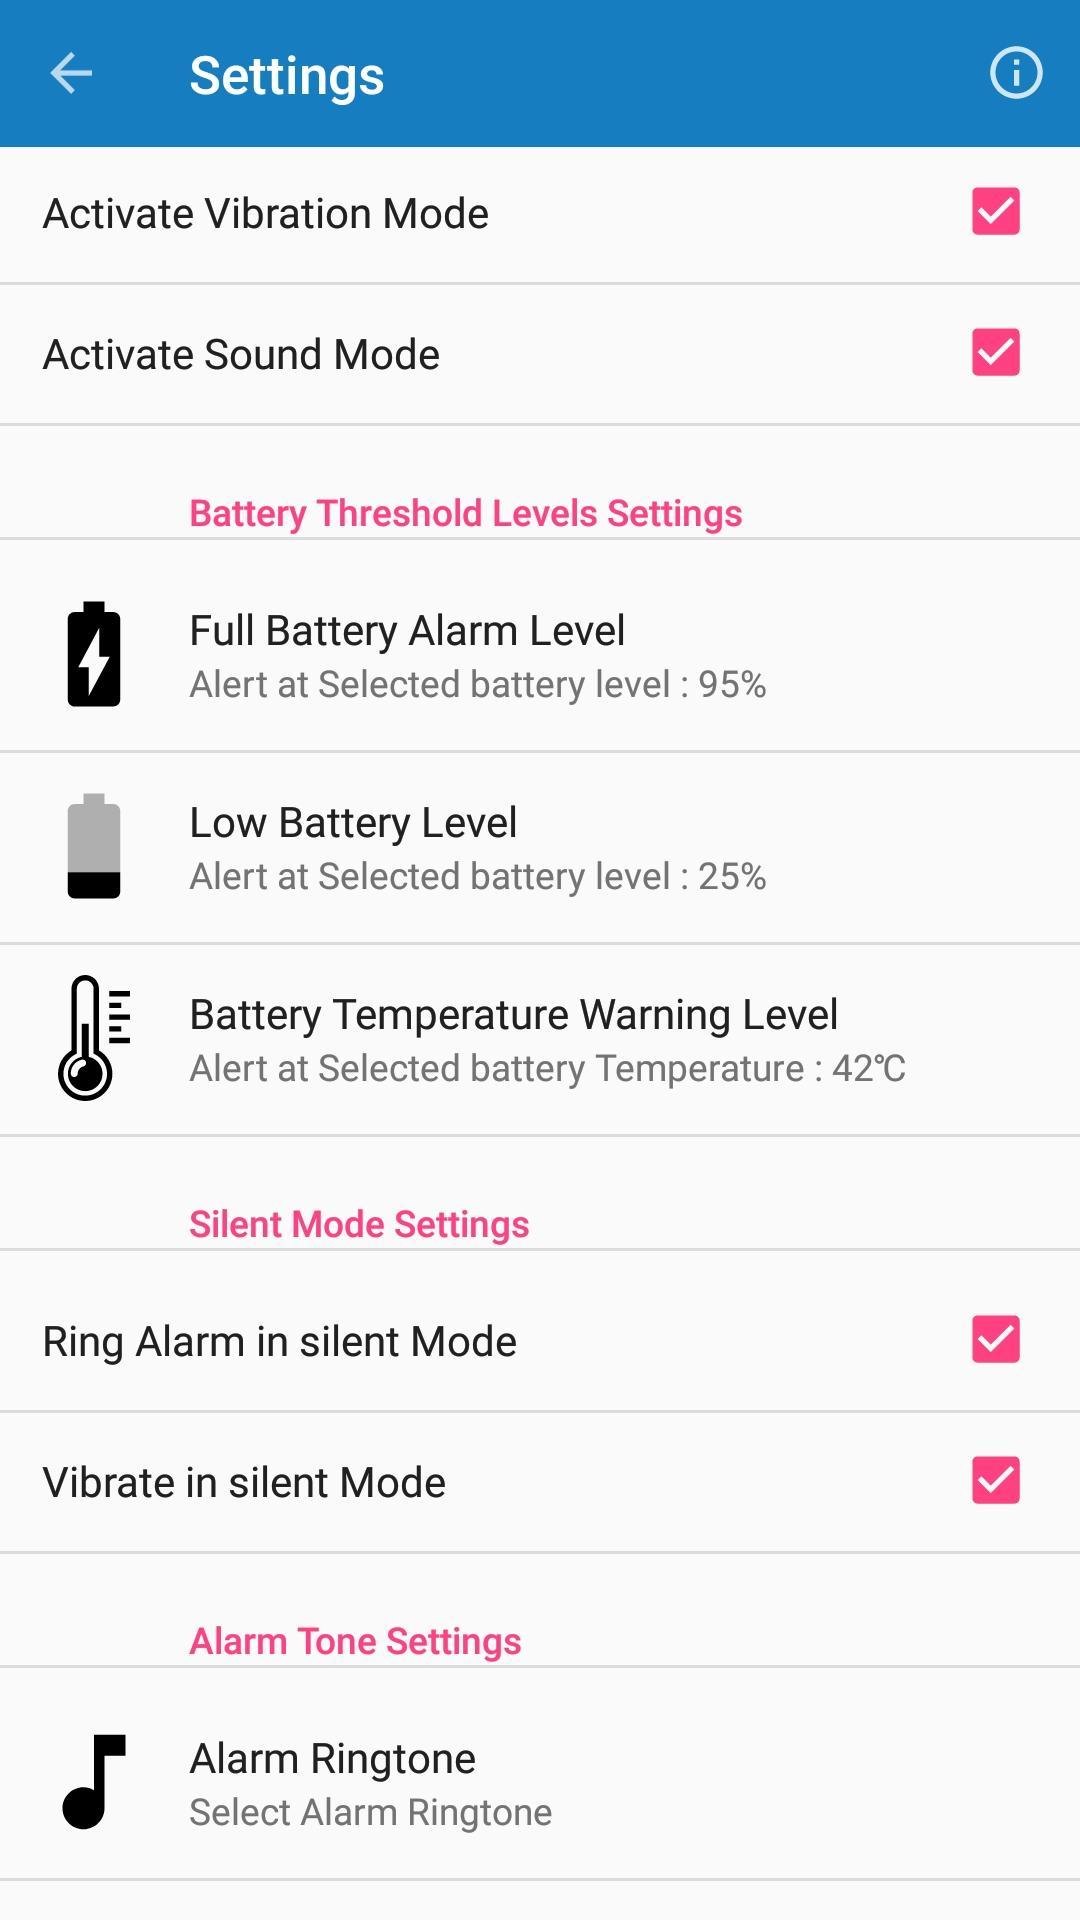 Battery sound notification на русском языке